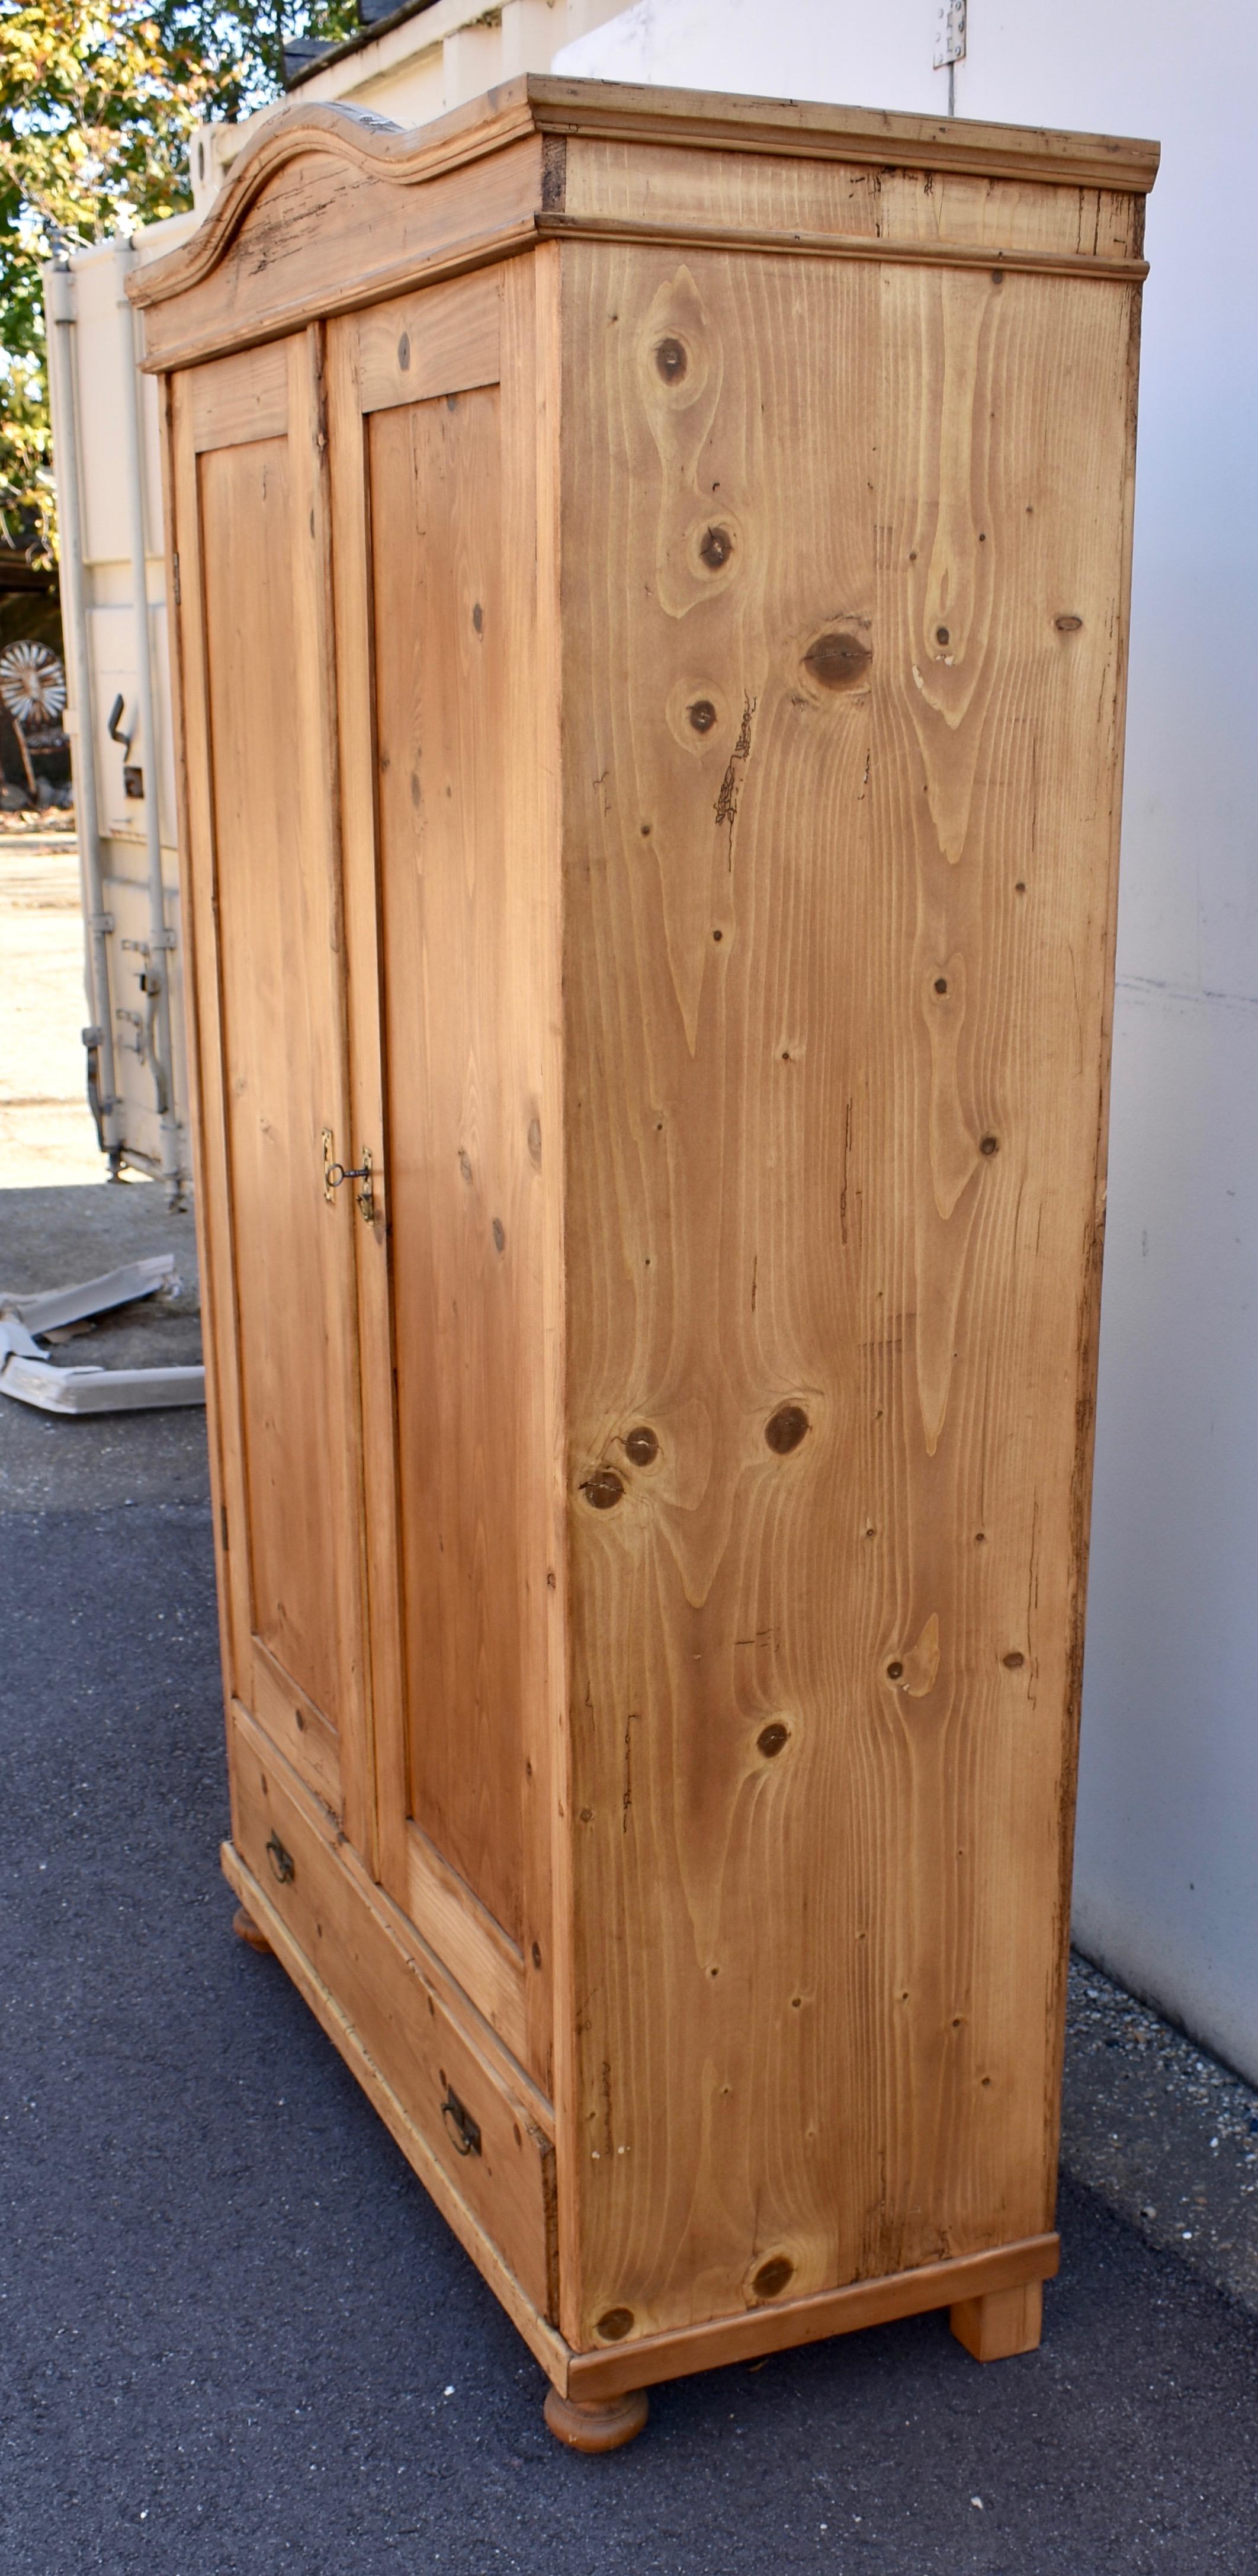 Polished Pine Bonnet-Top Armoire with Two Doors and One Drawer